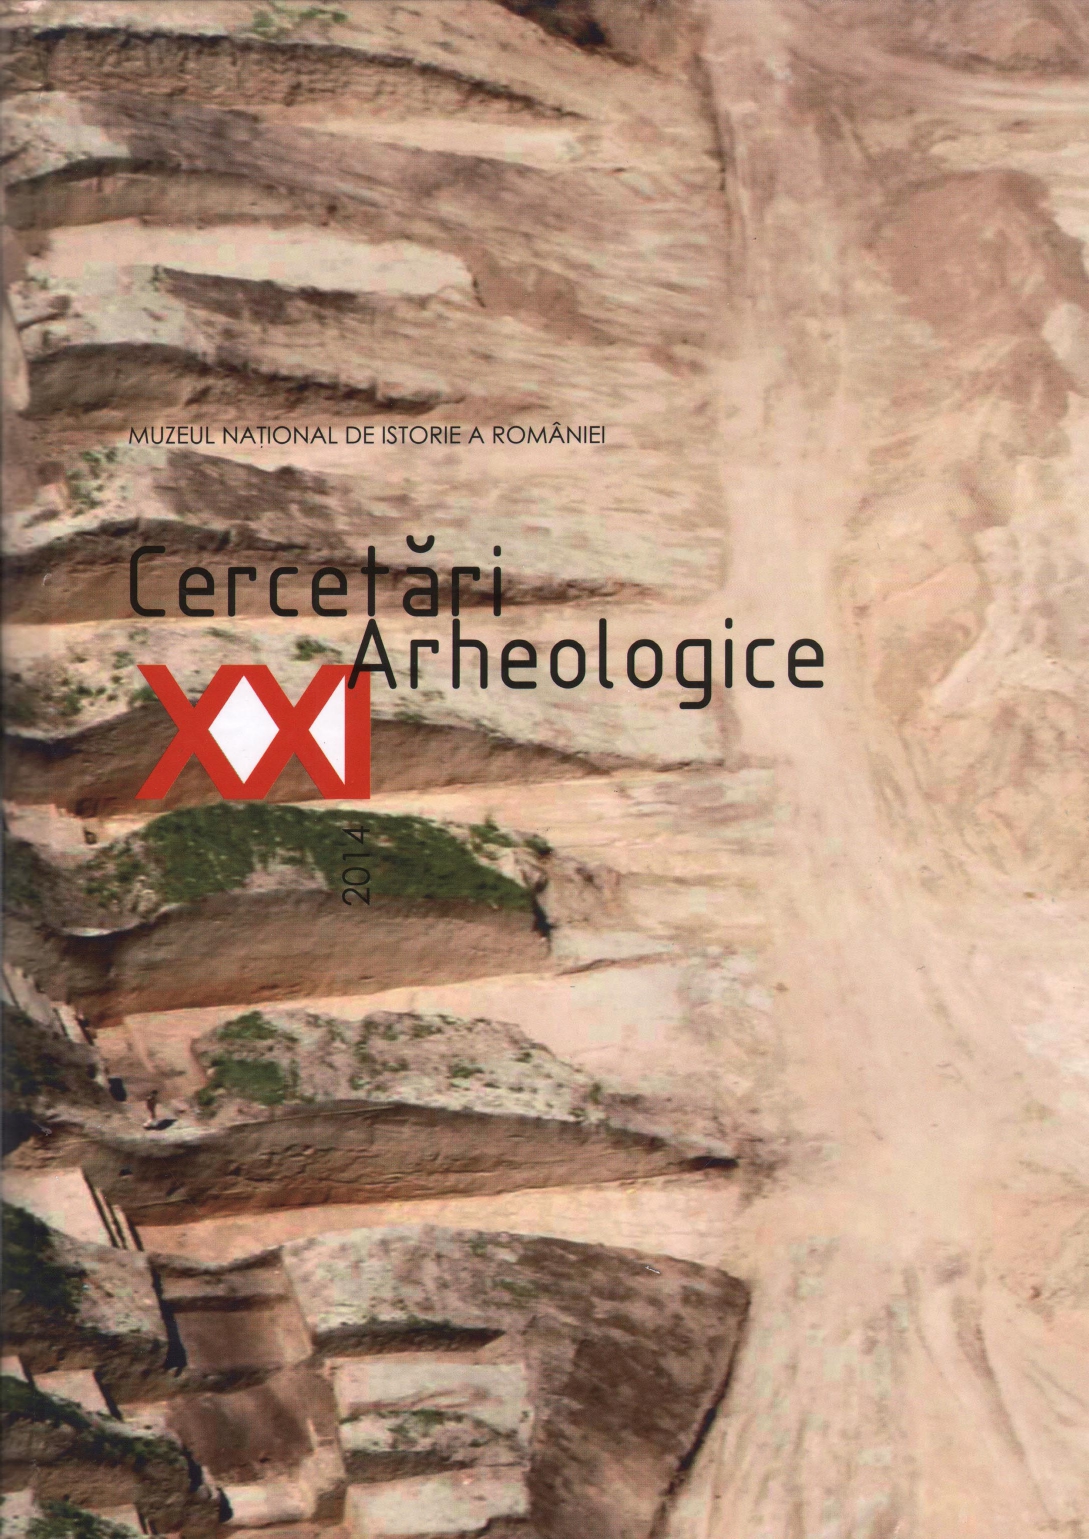 Archaeologicla research in MNIR (2009-2014) Cover Image